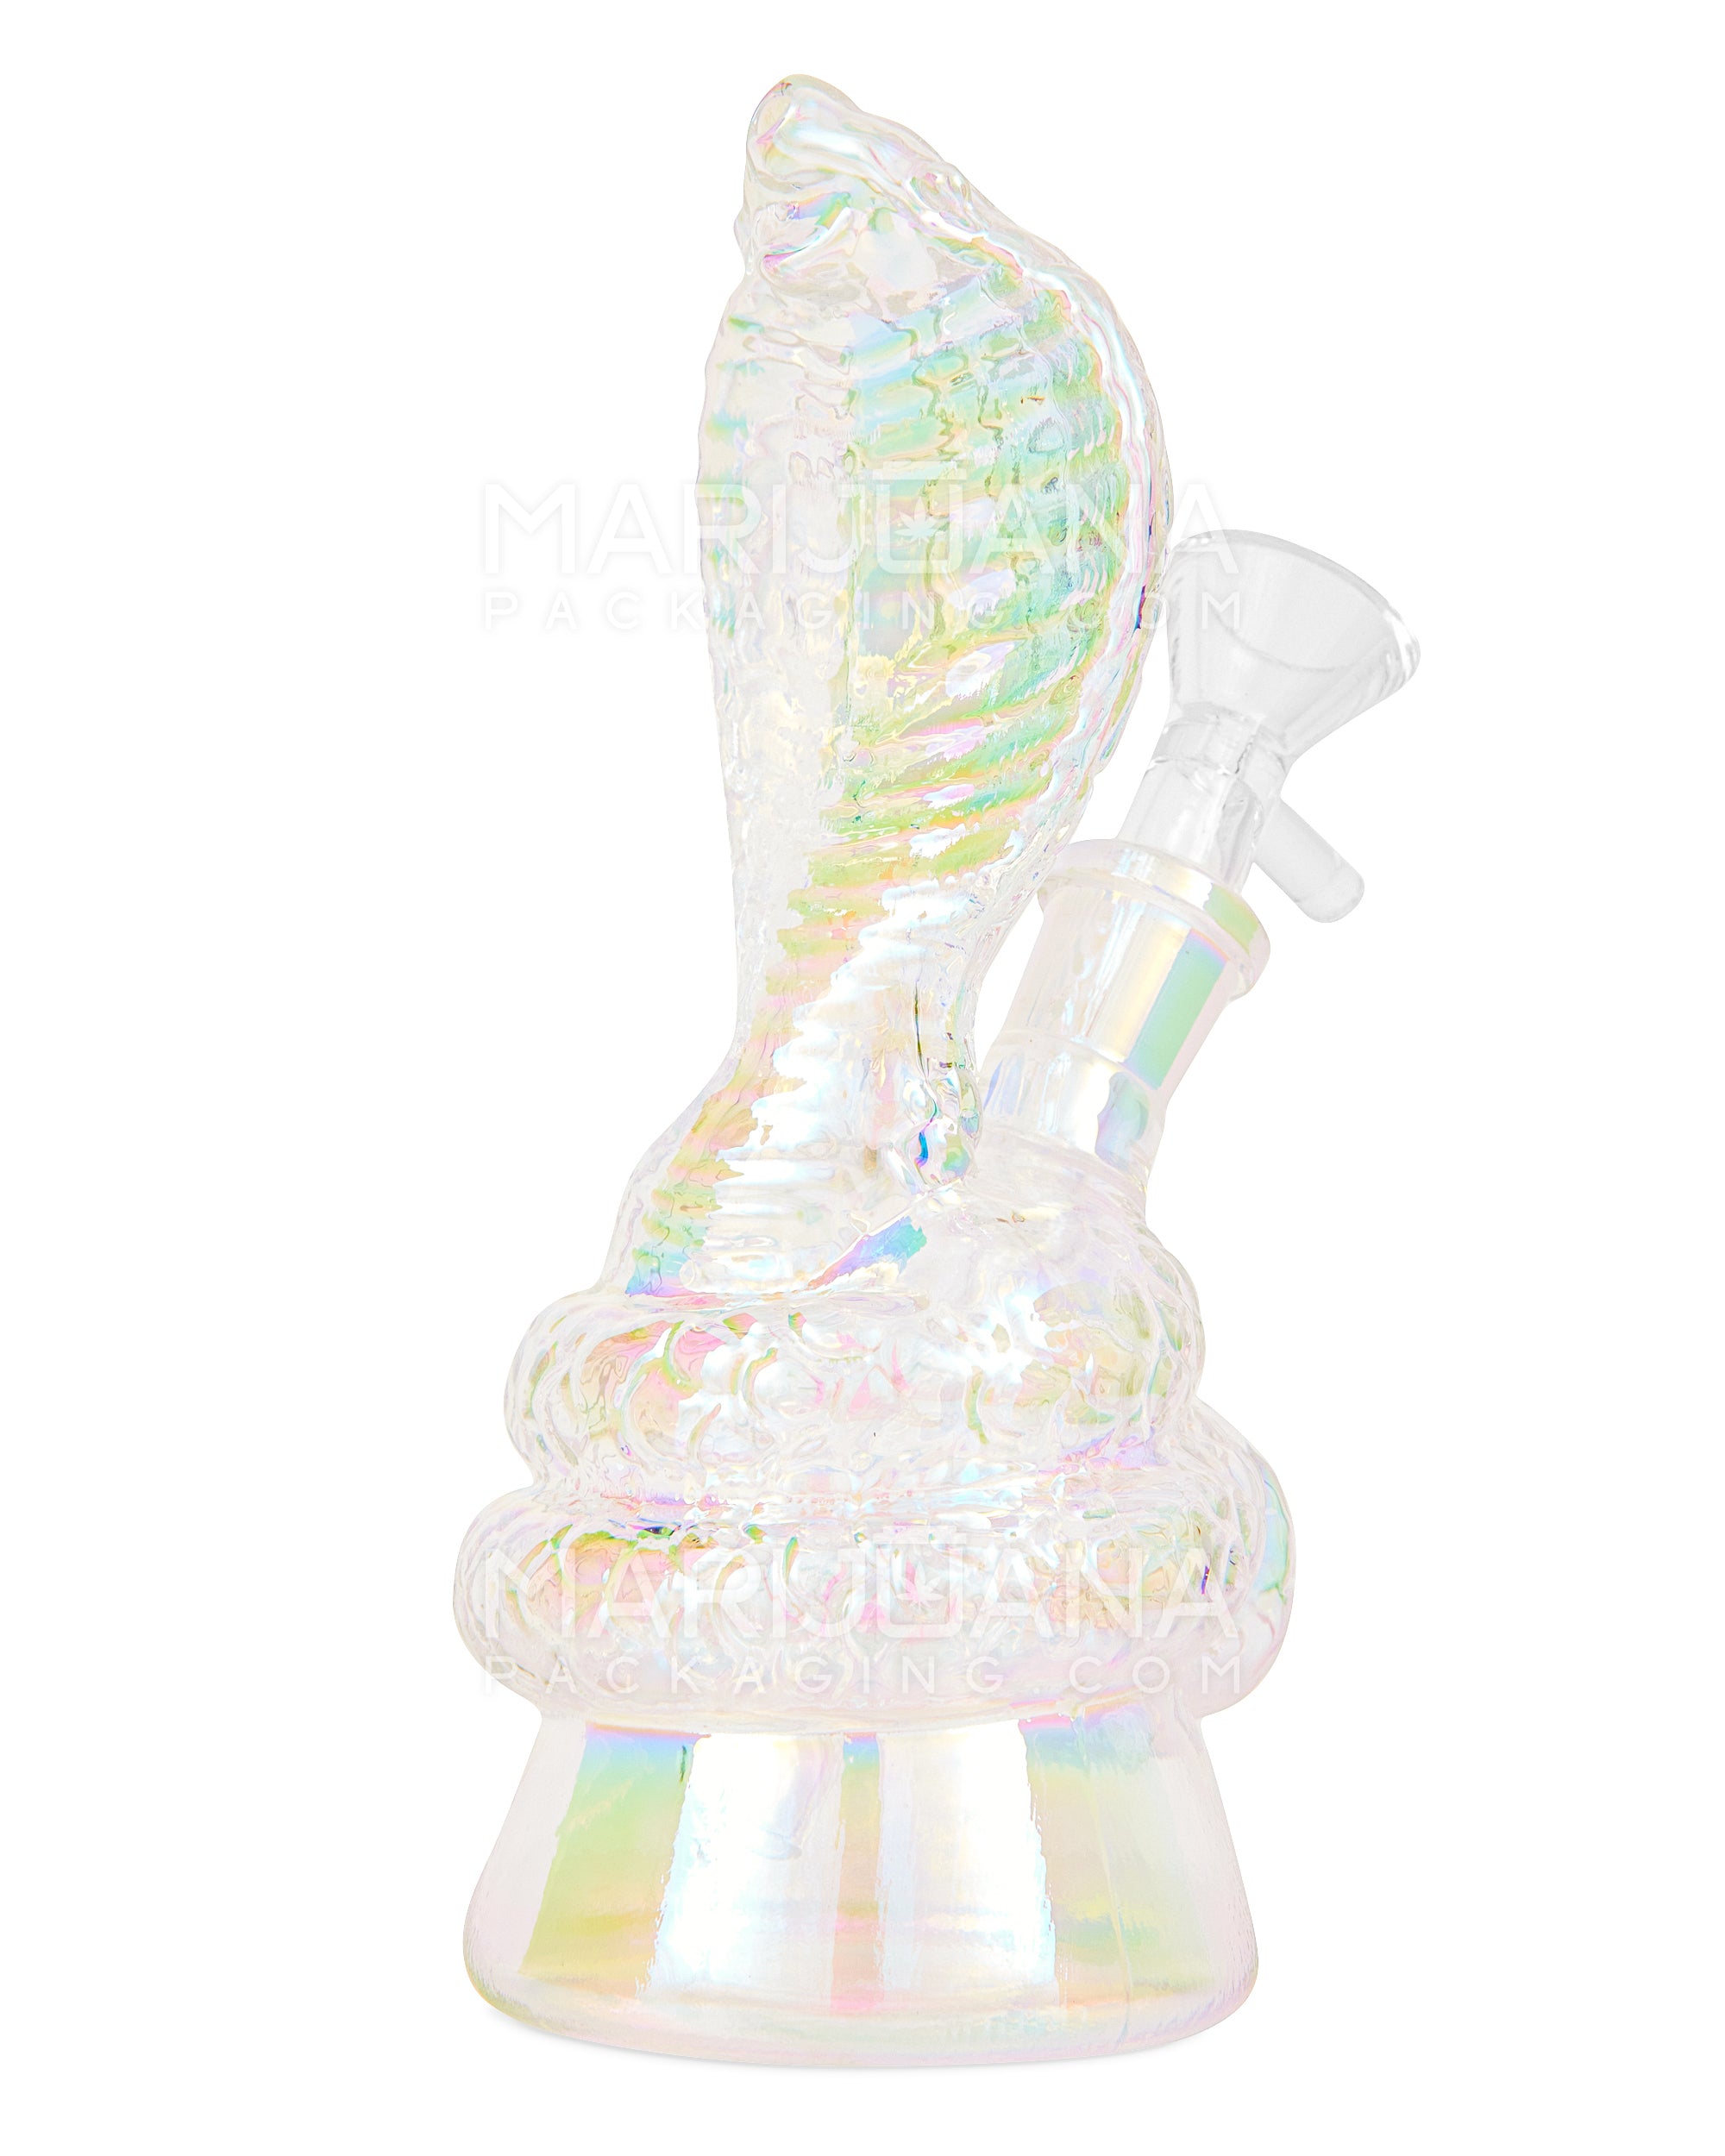 USA Glass | Iridescent Coiled Cobra Glass Water Pipe | 6.5in Tall - 14mm Bowl - Rainbow - 3